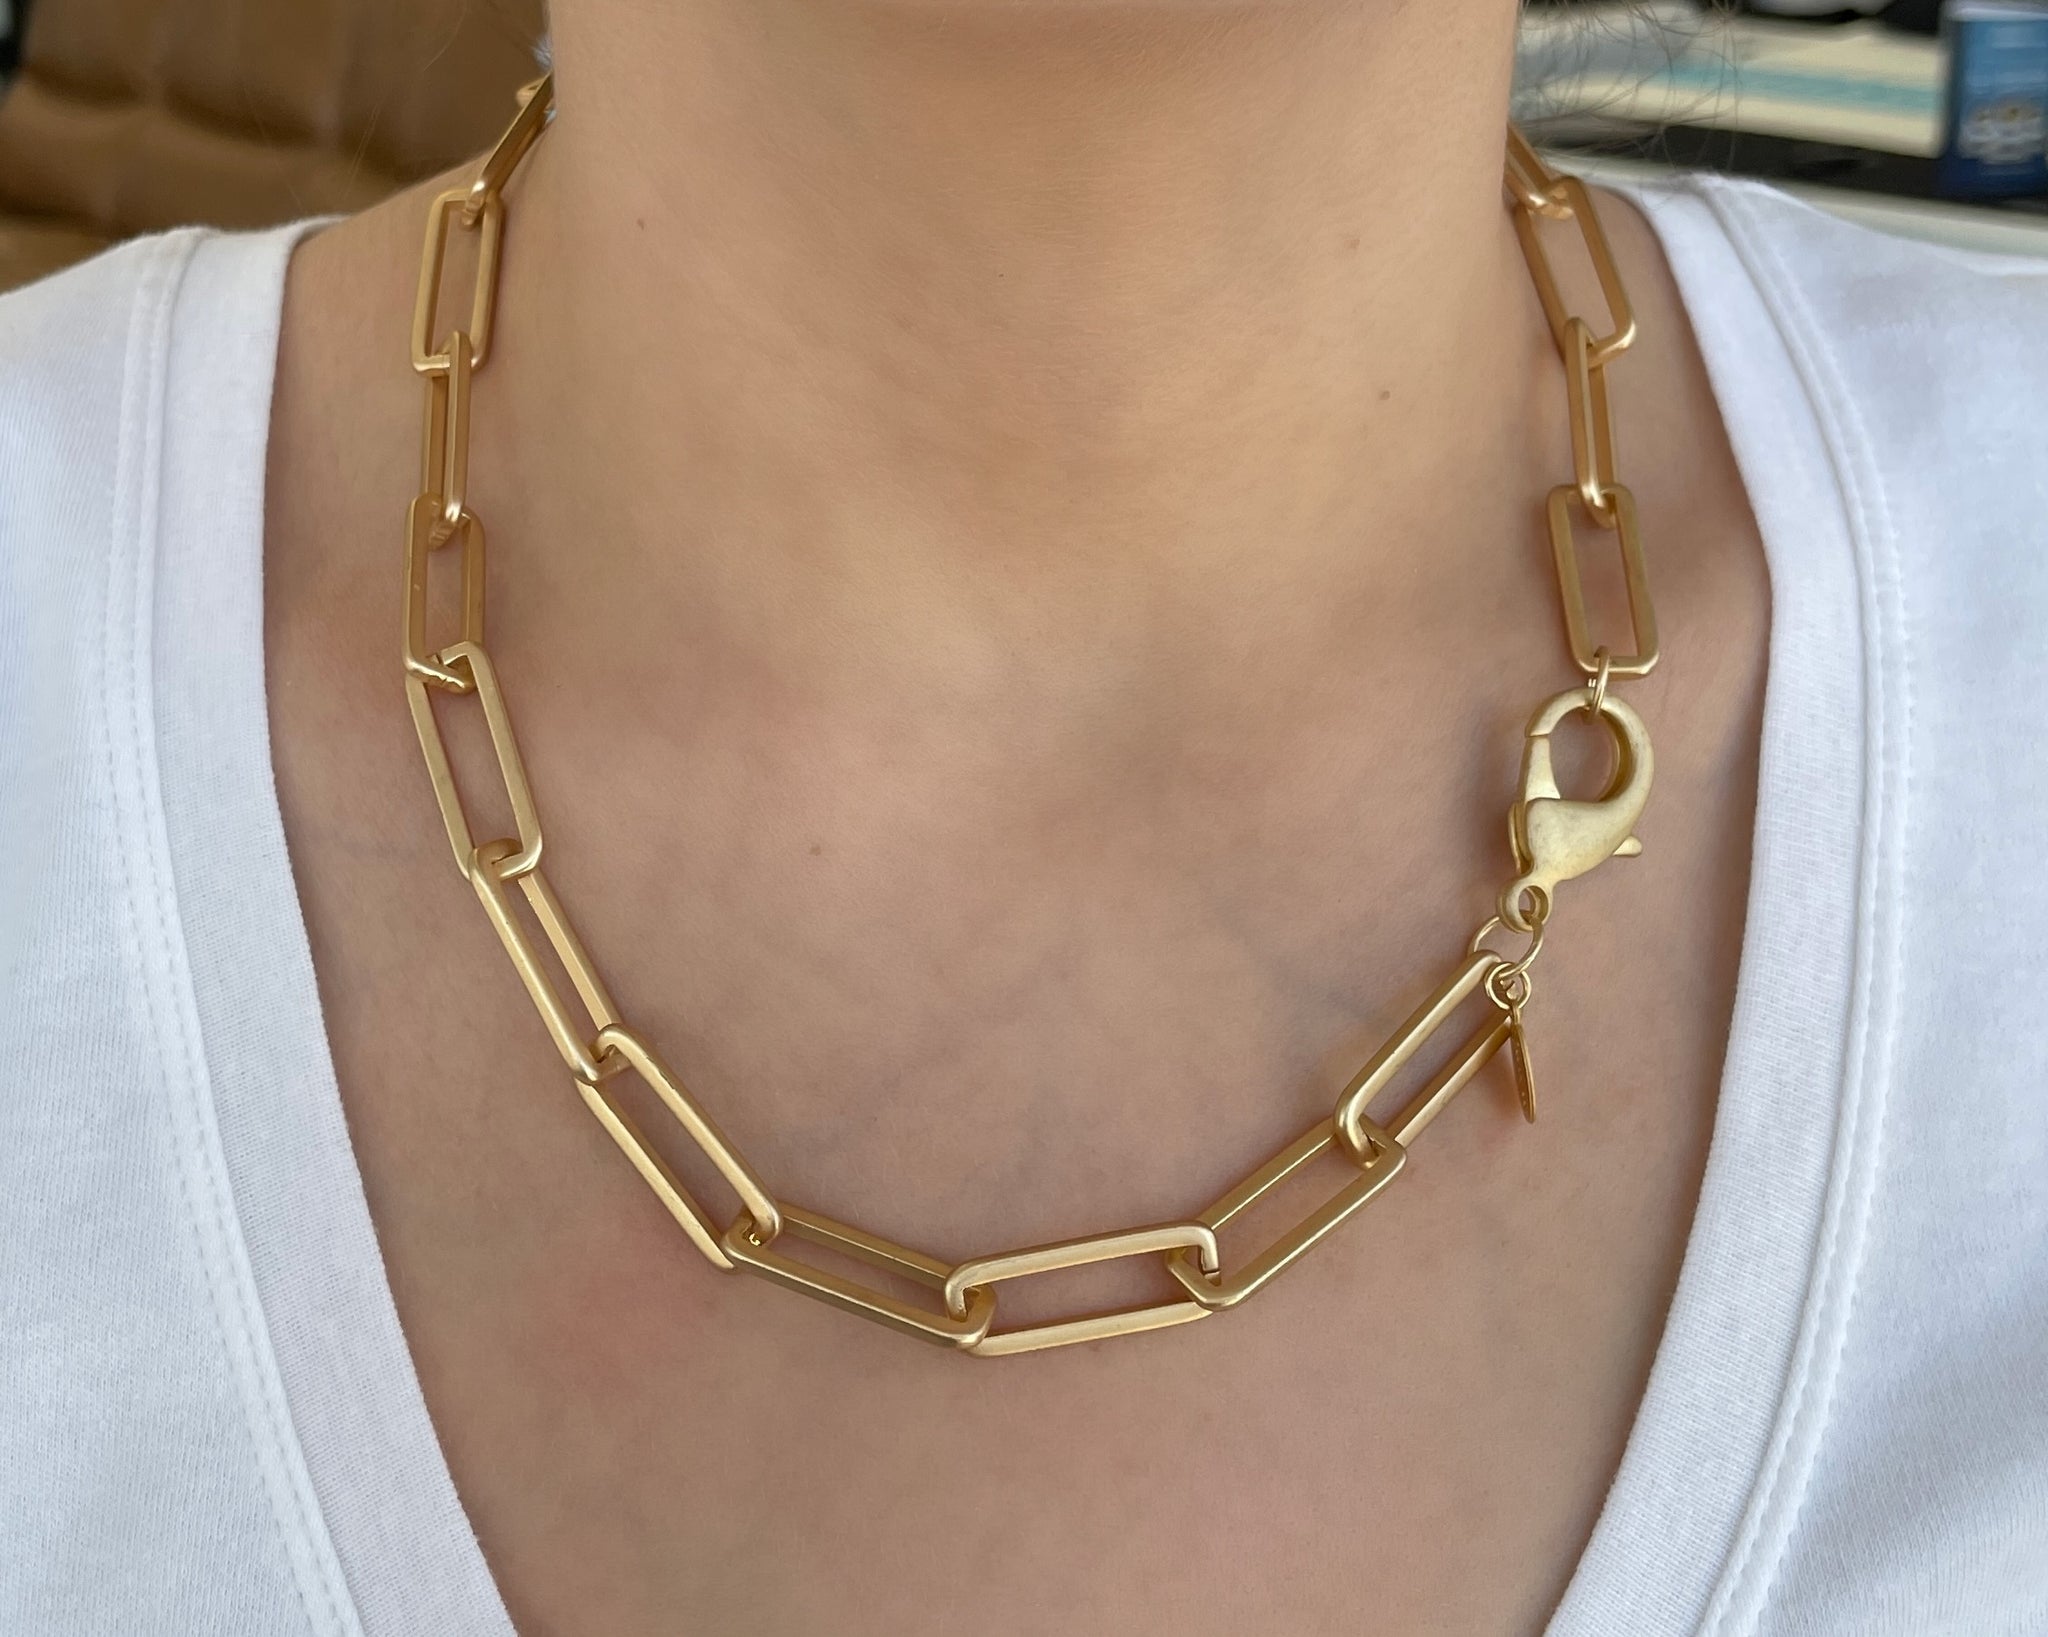 PaperClip chain link necklace or bracelet, 7-30 inches, Gold filled OR -  South Paw Studios Handcrafted Designer Jewelry